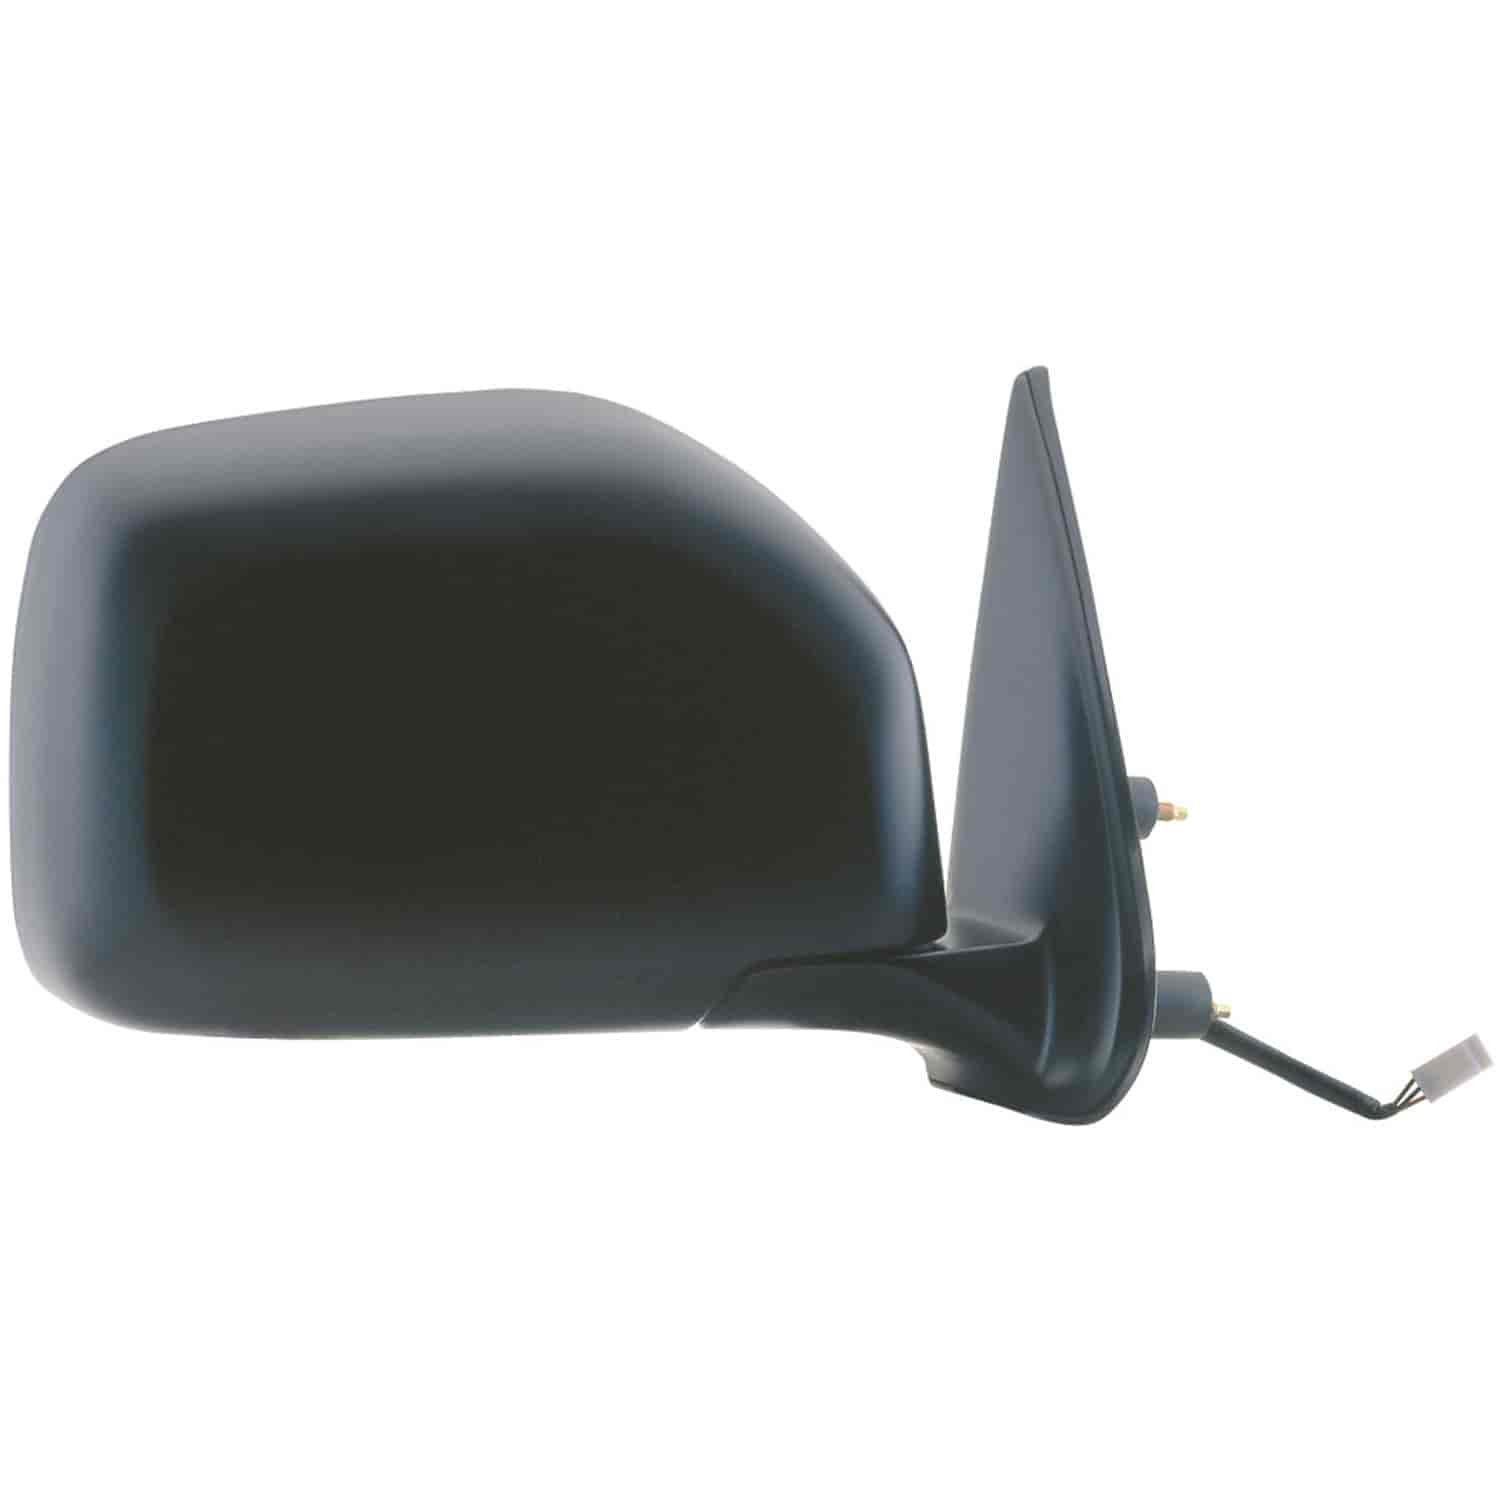 OEM Style Replacement mirror for 01-04 Toyota Tacoma passenger side mirror tested to fit and functio